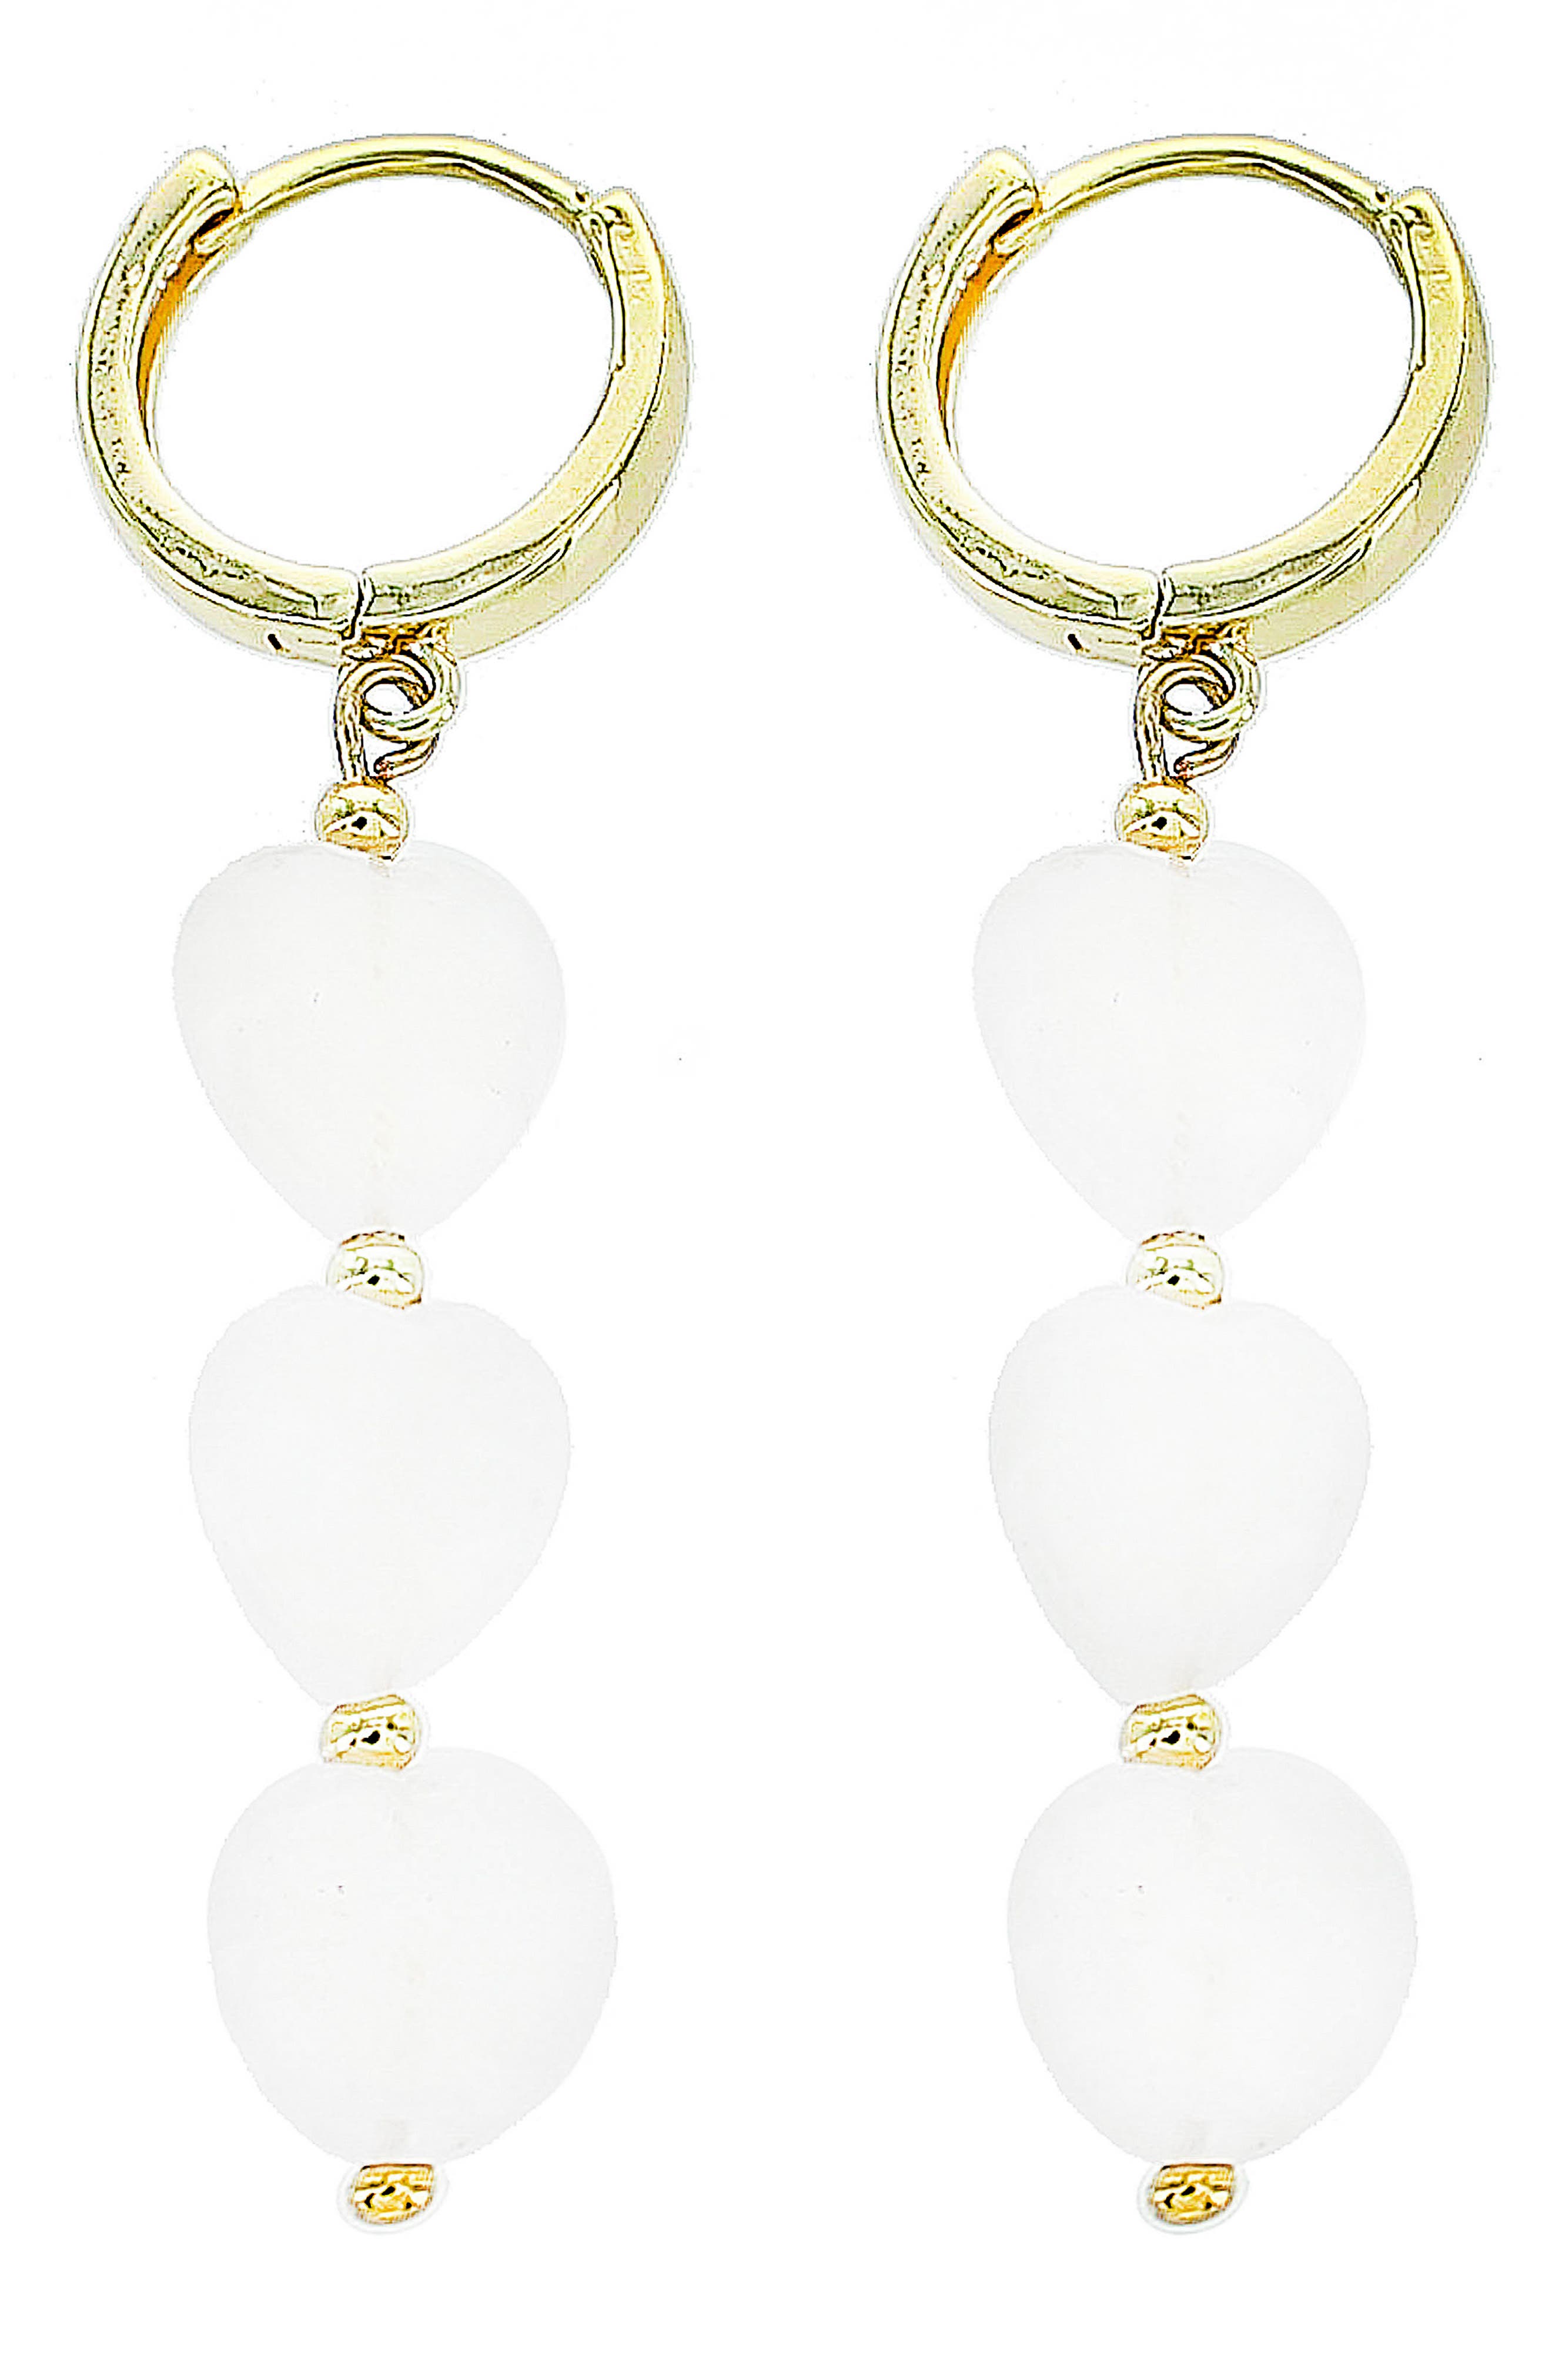 Bishilin Gold Plated Earrings for Women Pearl Anniversary Party Earrings Gold